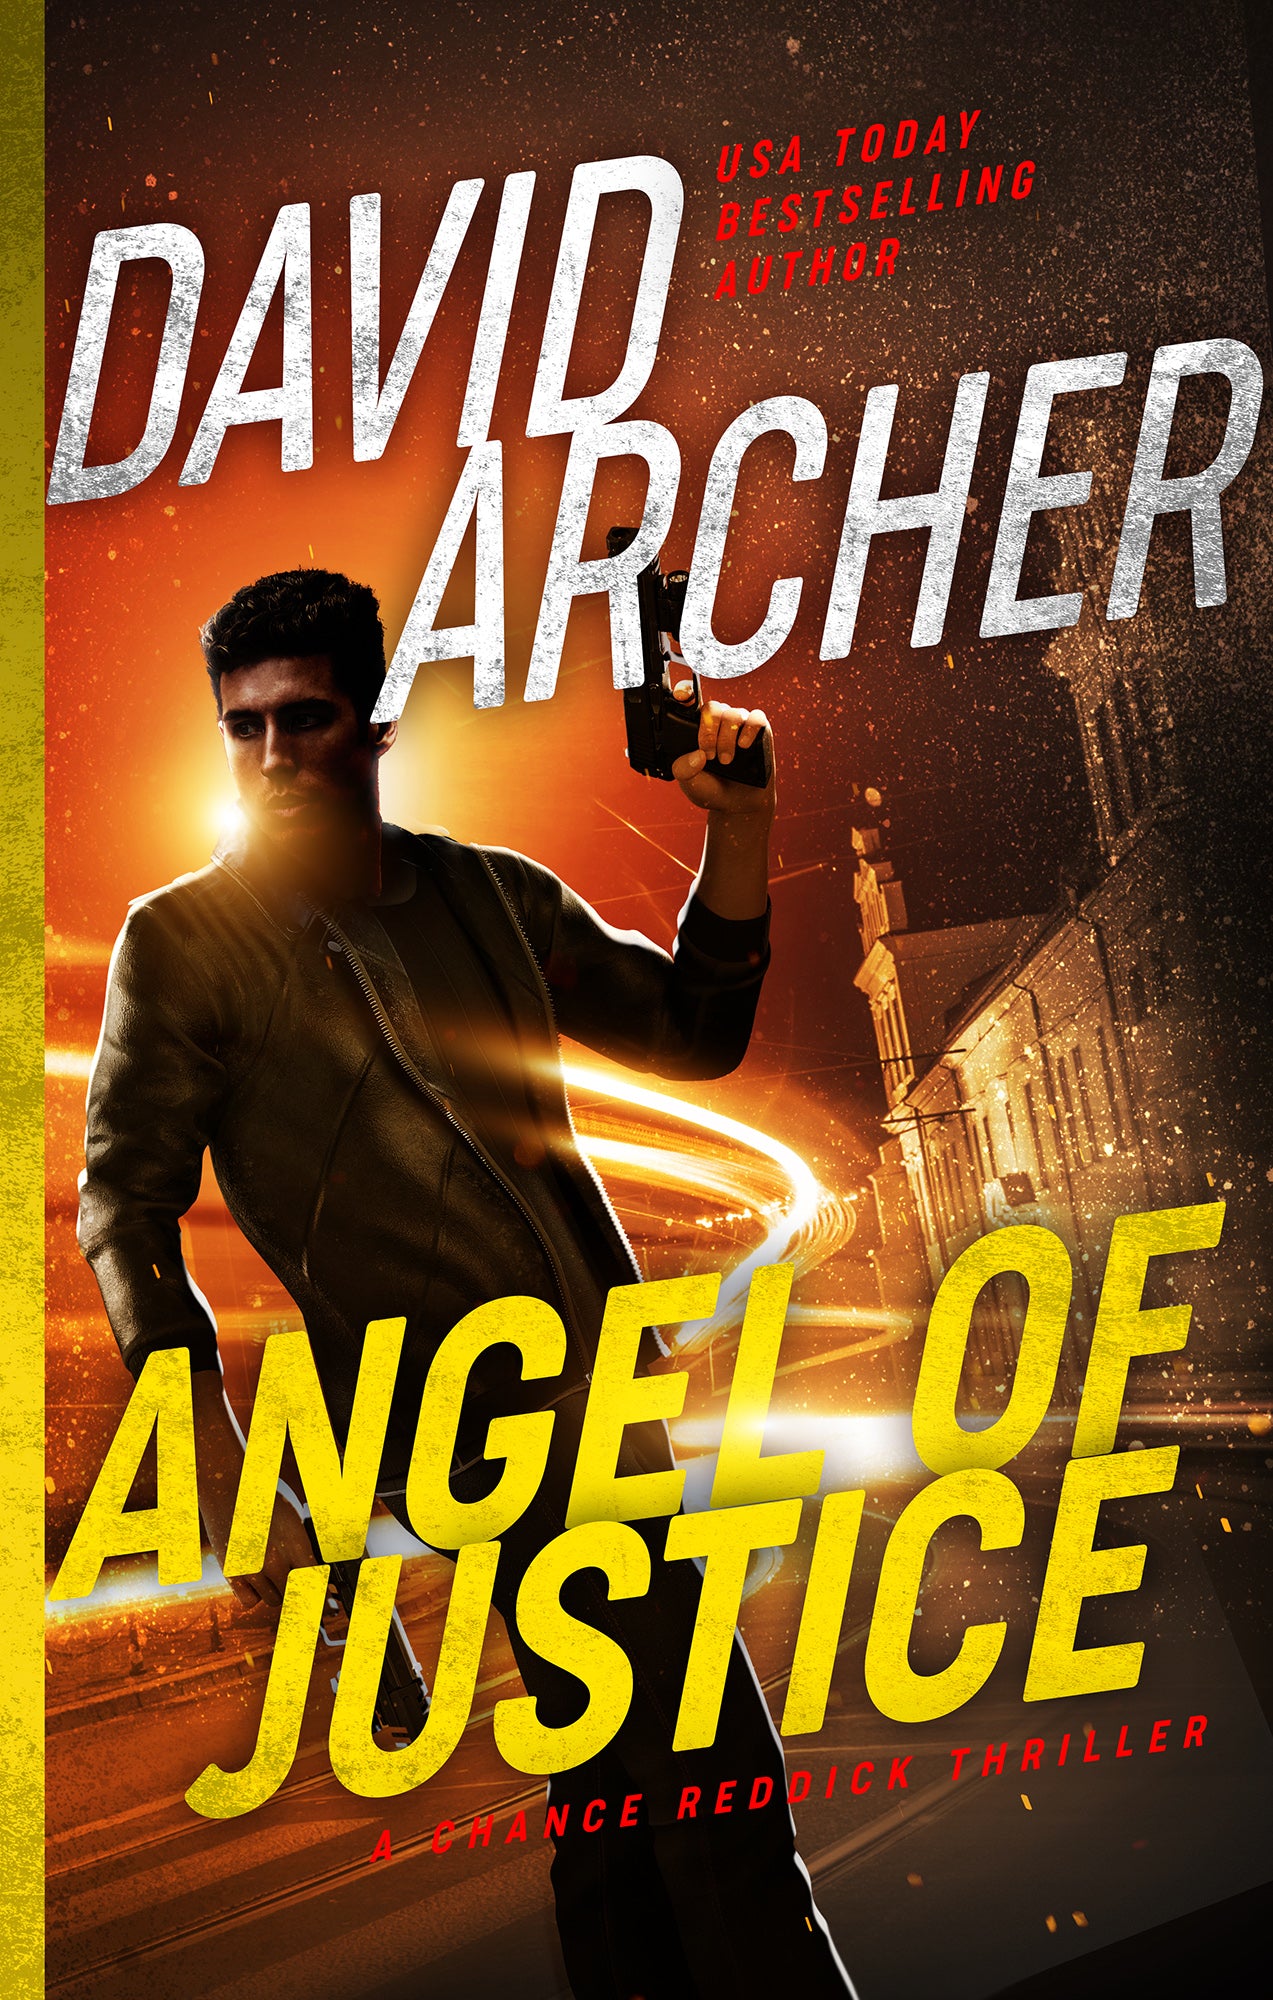 Angel of Justice